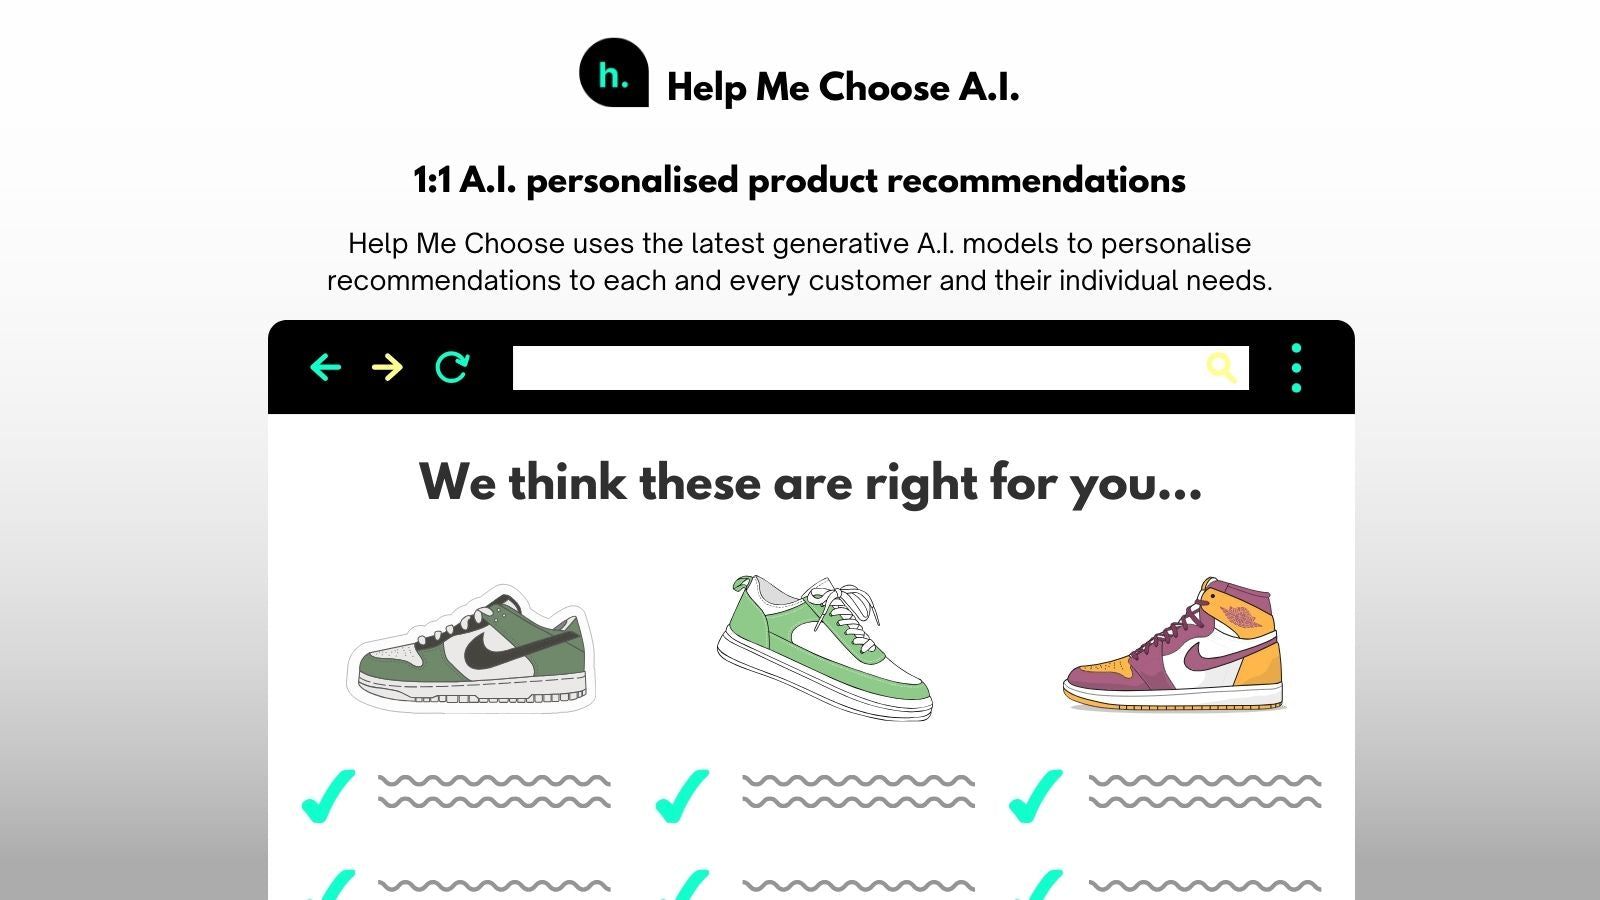 Use A.I. to guide customers in a personalized way